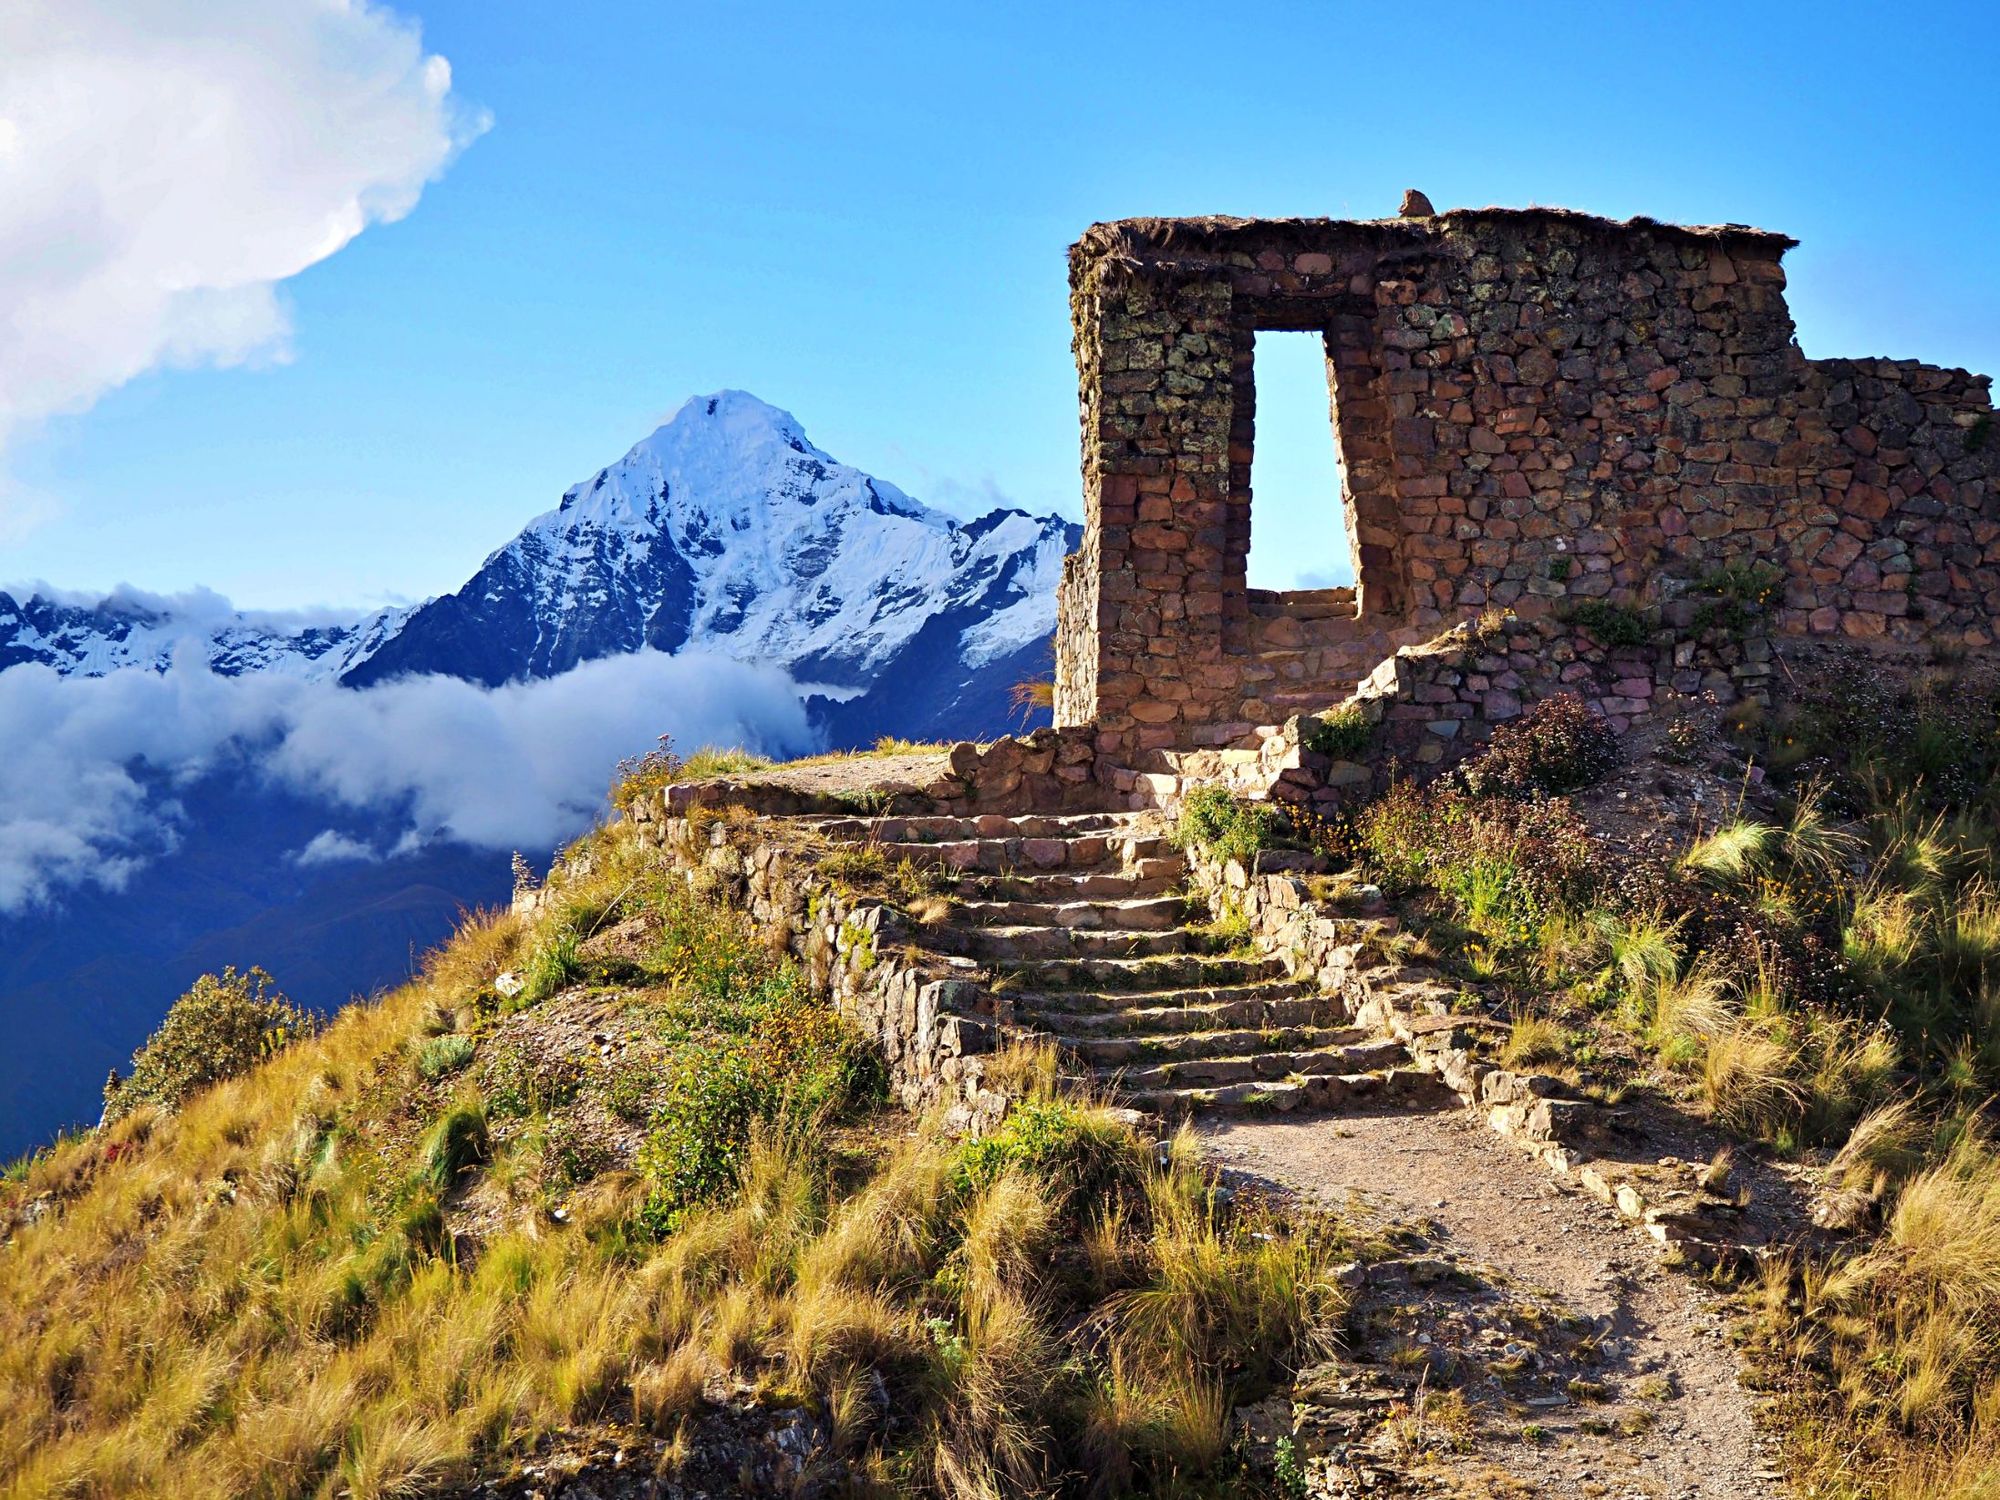 The mountains around the Sacred Valley soar to 5,000m, but the valley itself has a lower altitude than the city of Cusco. Photo: Getty